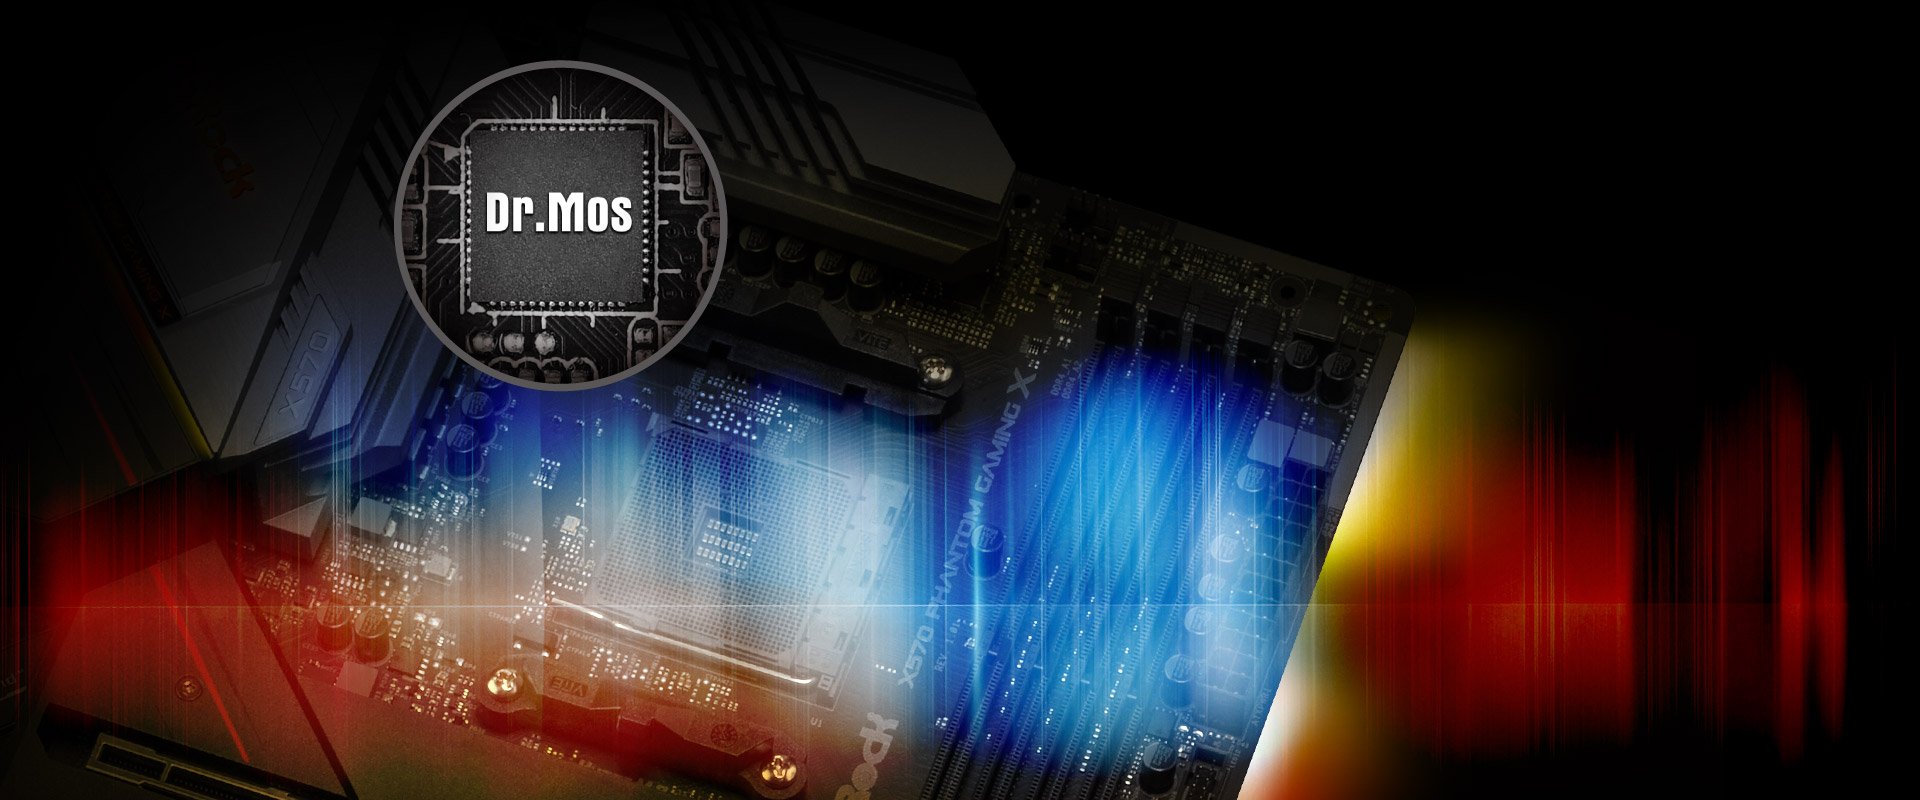 DR MOS Chipset above a color-spectrum filtered ASRock X570 Taichi Motherboard